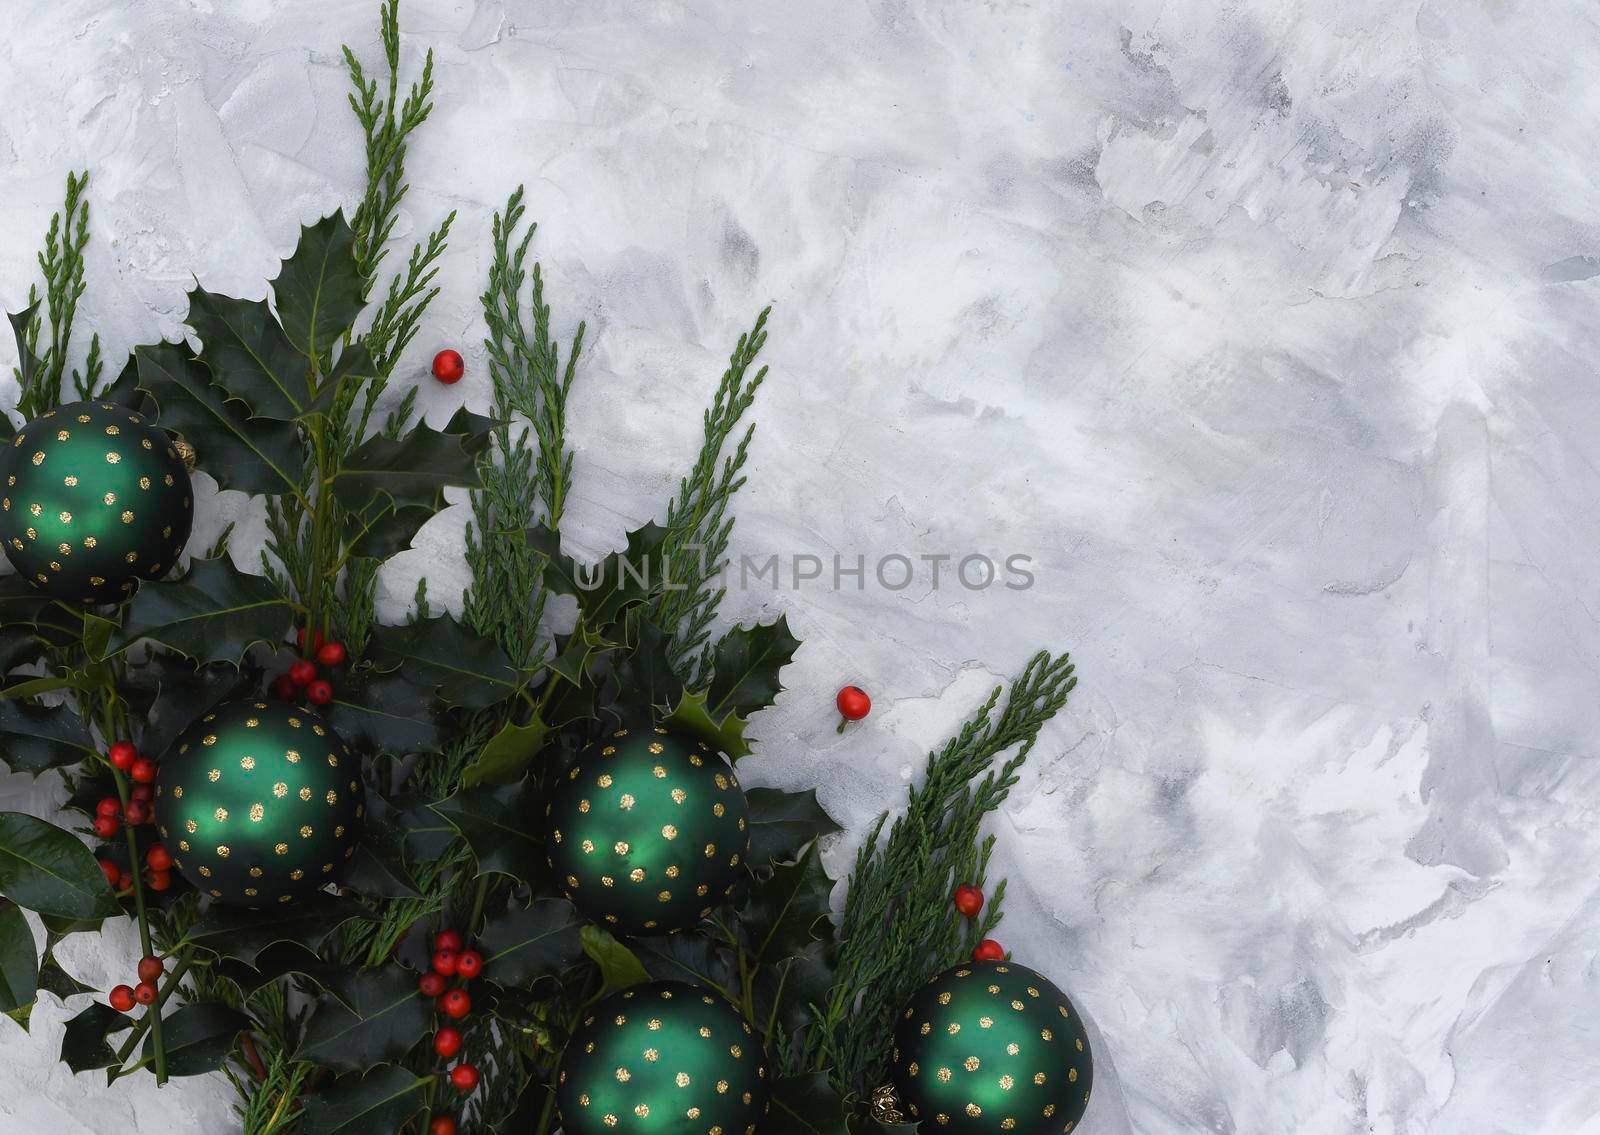 Christmas or new year table decor with fir branches, holly branches with berries by KaterinaDalemans